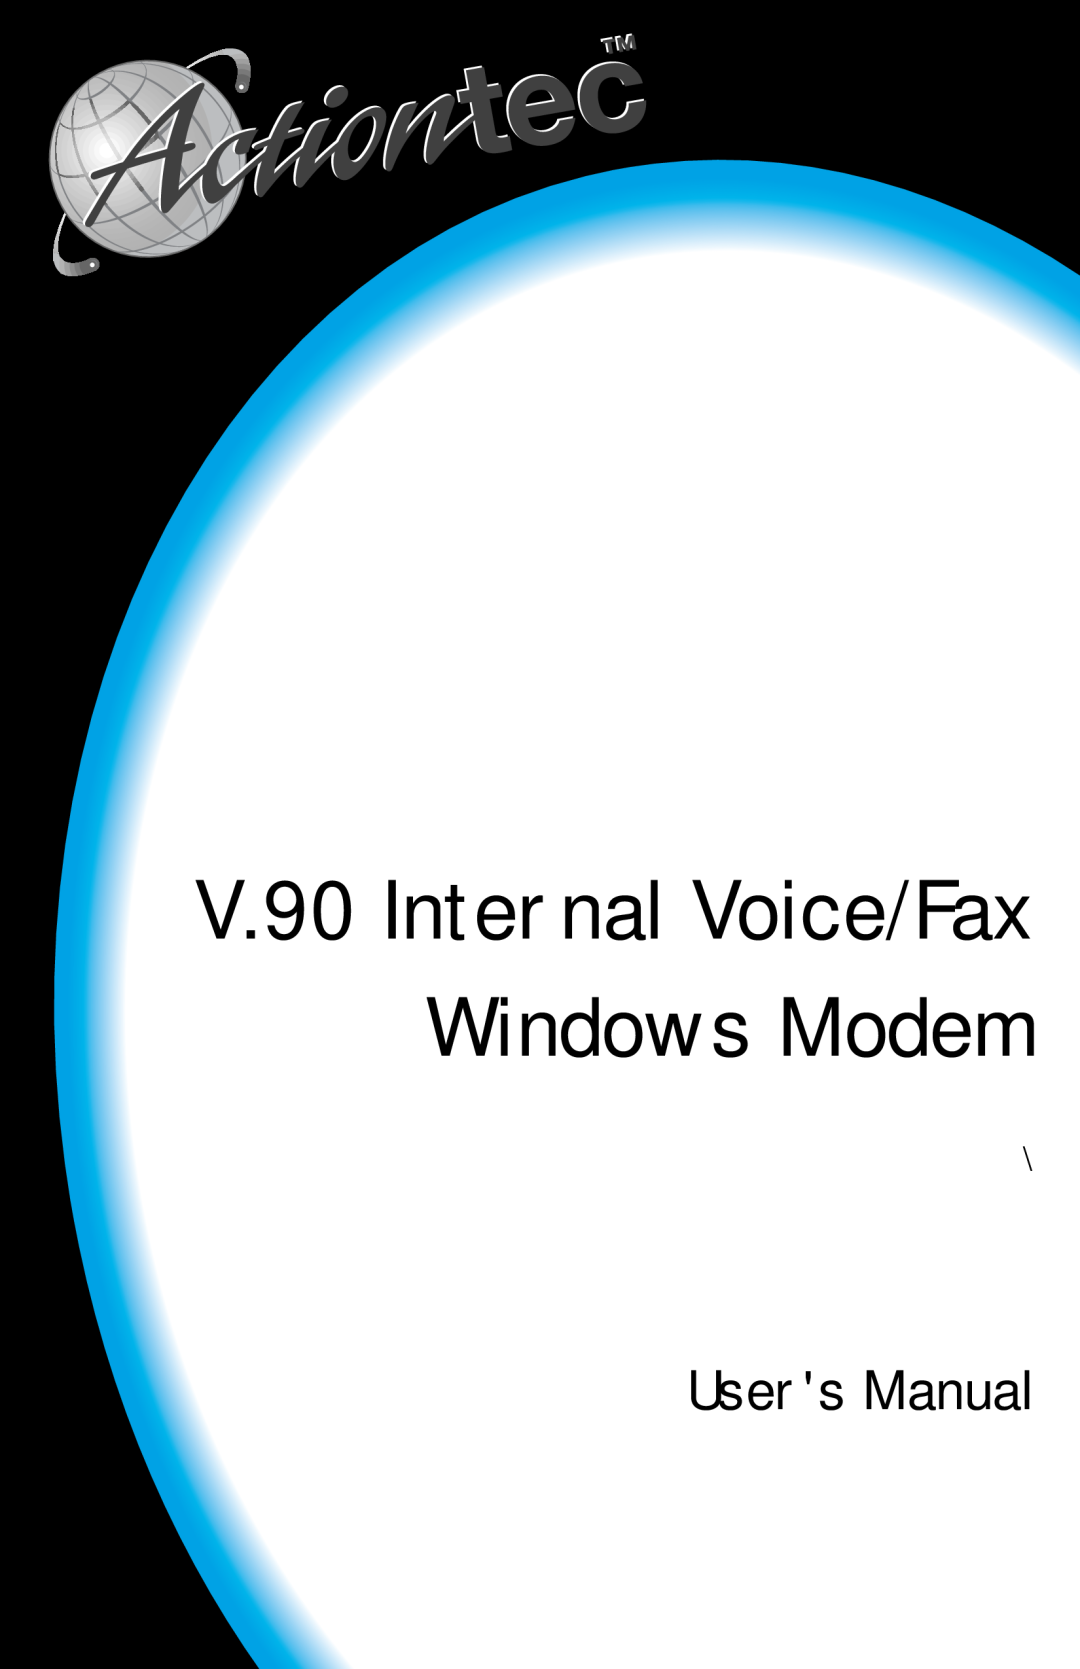 Actiontec electronic IS560LH user manual V.90 Internal Voice/Fax Windows Modem, Users Manual 